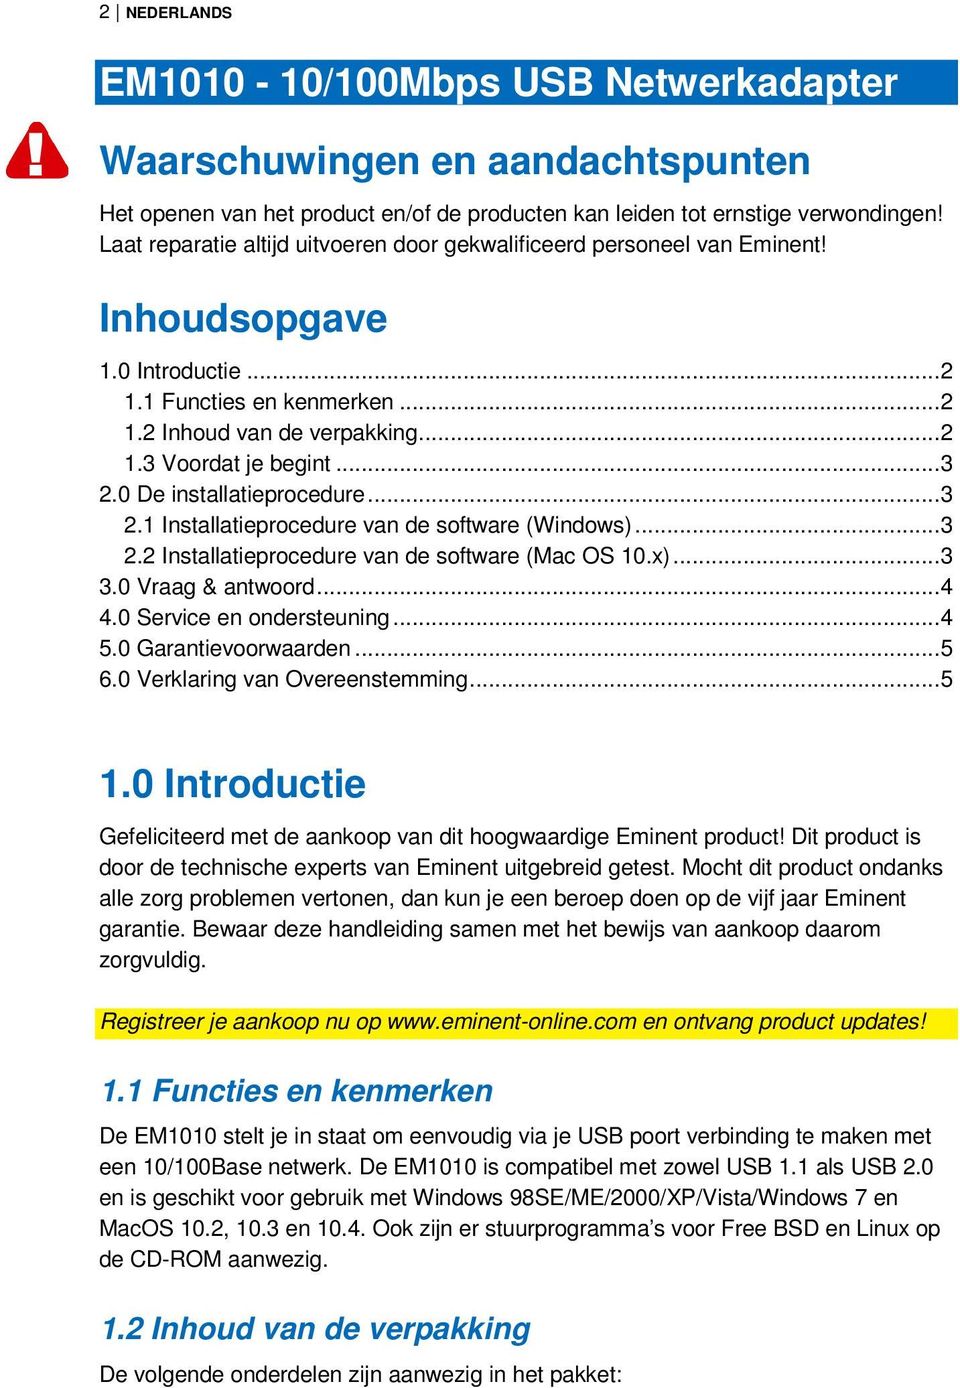 .. 3 2.0 De installatieprocedure... 3 2.1 Installatieprocedure van de software (Windows)... 3 2.2 Installatieprocedure van de software (Mac OS 10.x)... 3 3.0 Vraag & antwoord... 4 4.